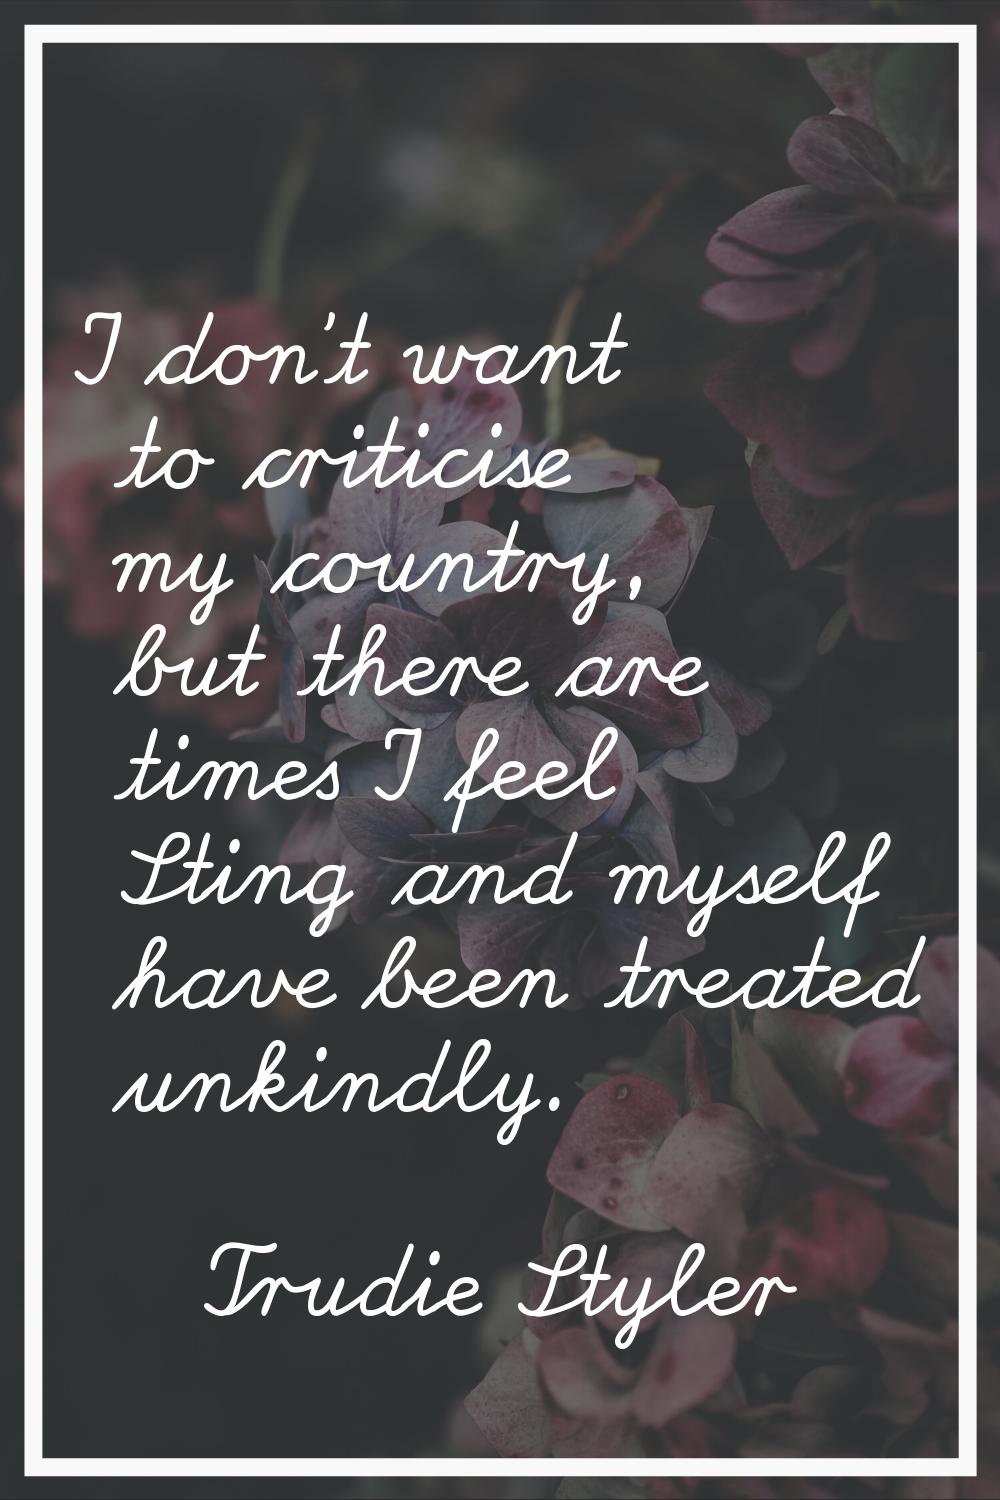 I don't want to criticise my country, but there are times I feel Sting and myself have been treated